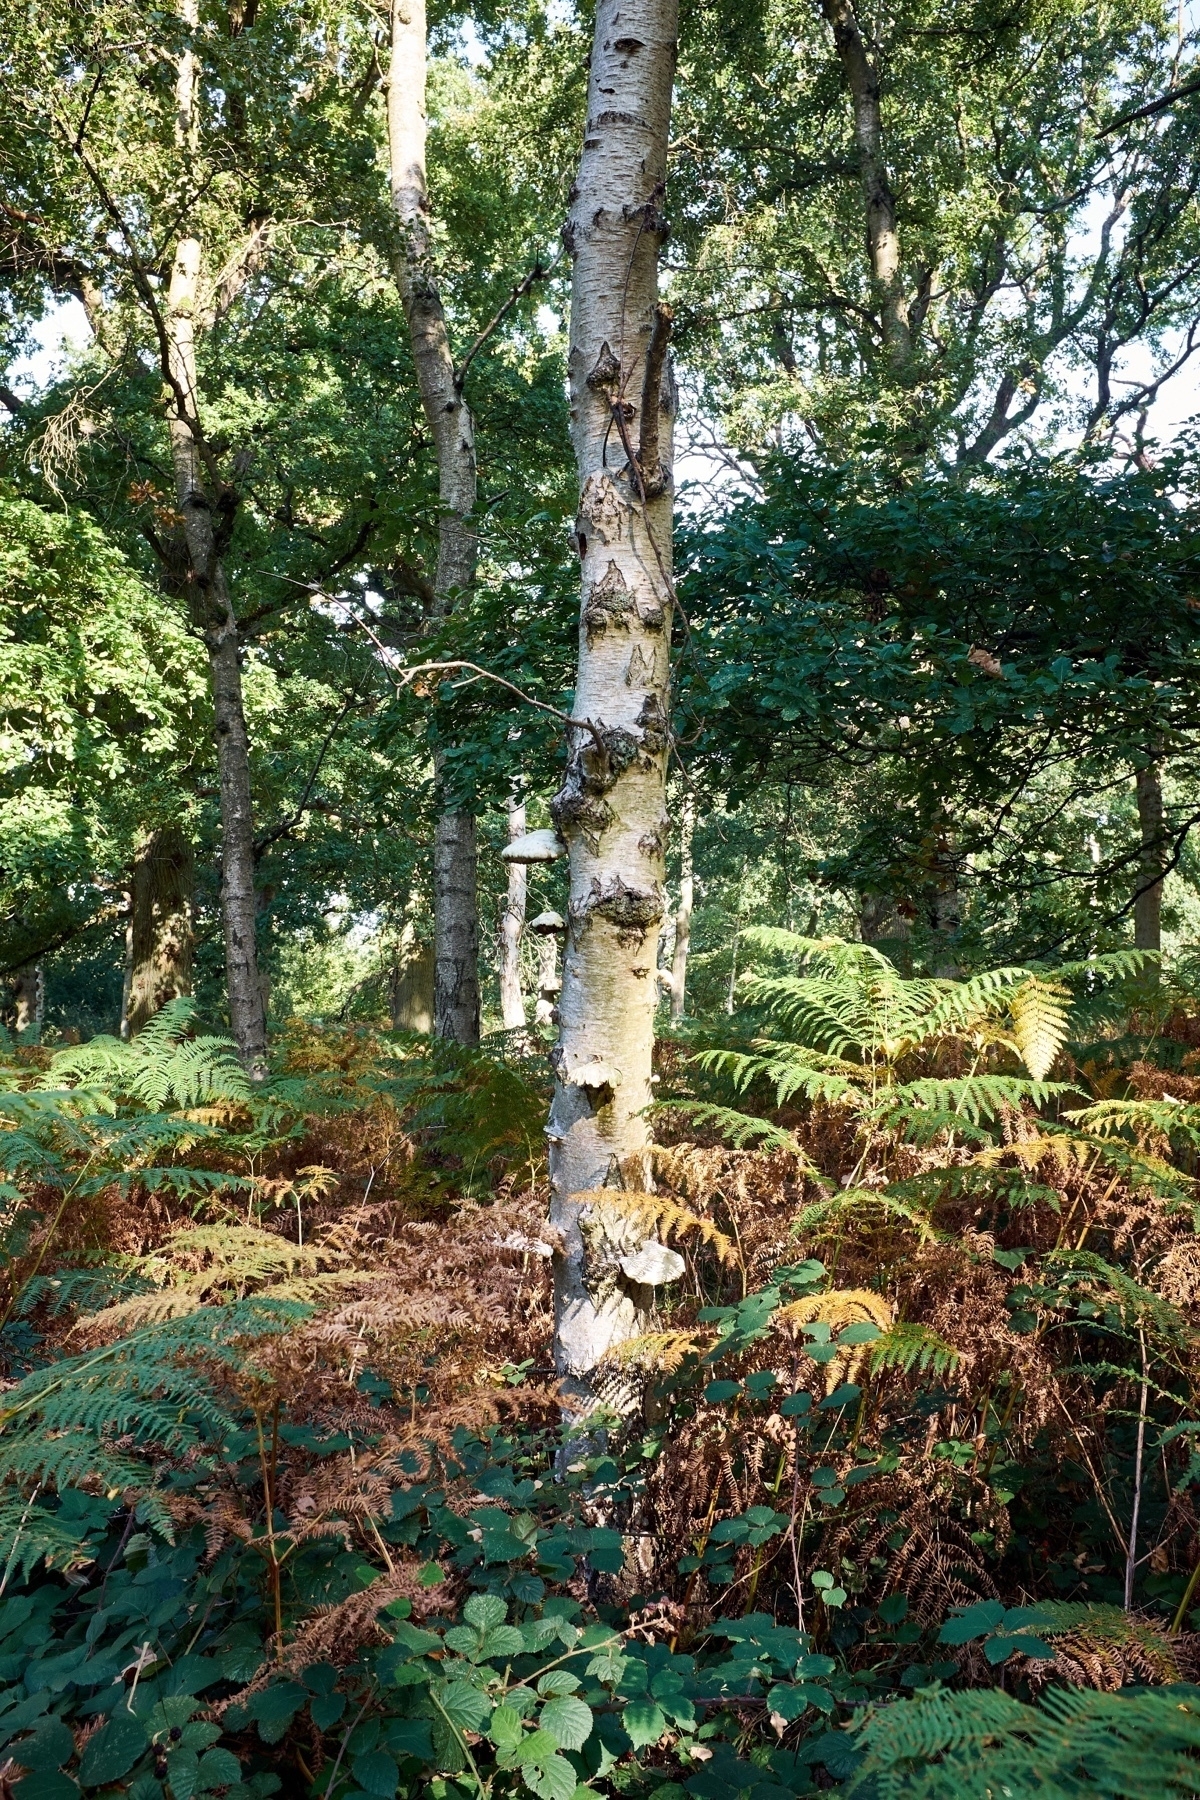 A deciduous woodland with a birch tree in the foreground